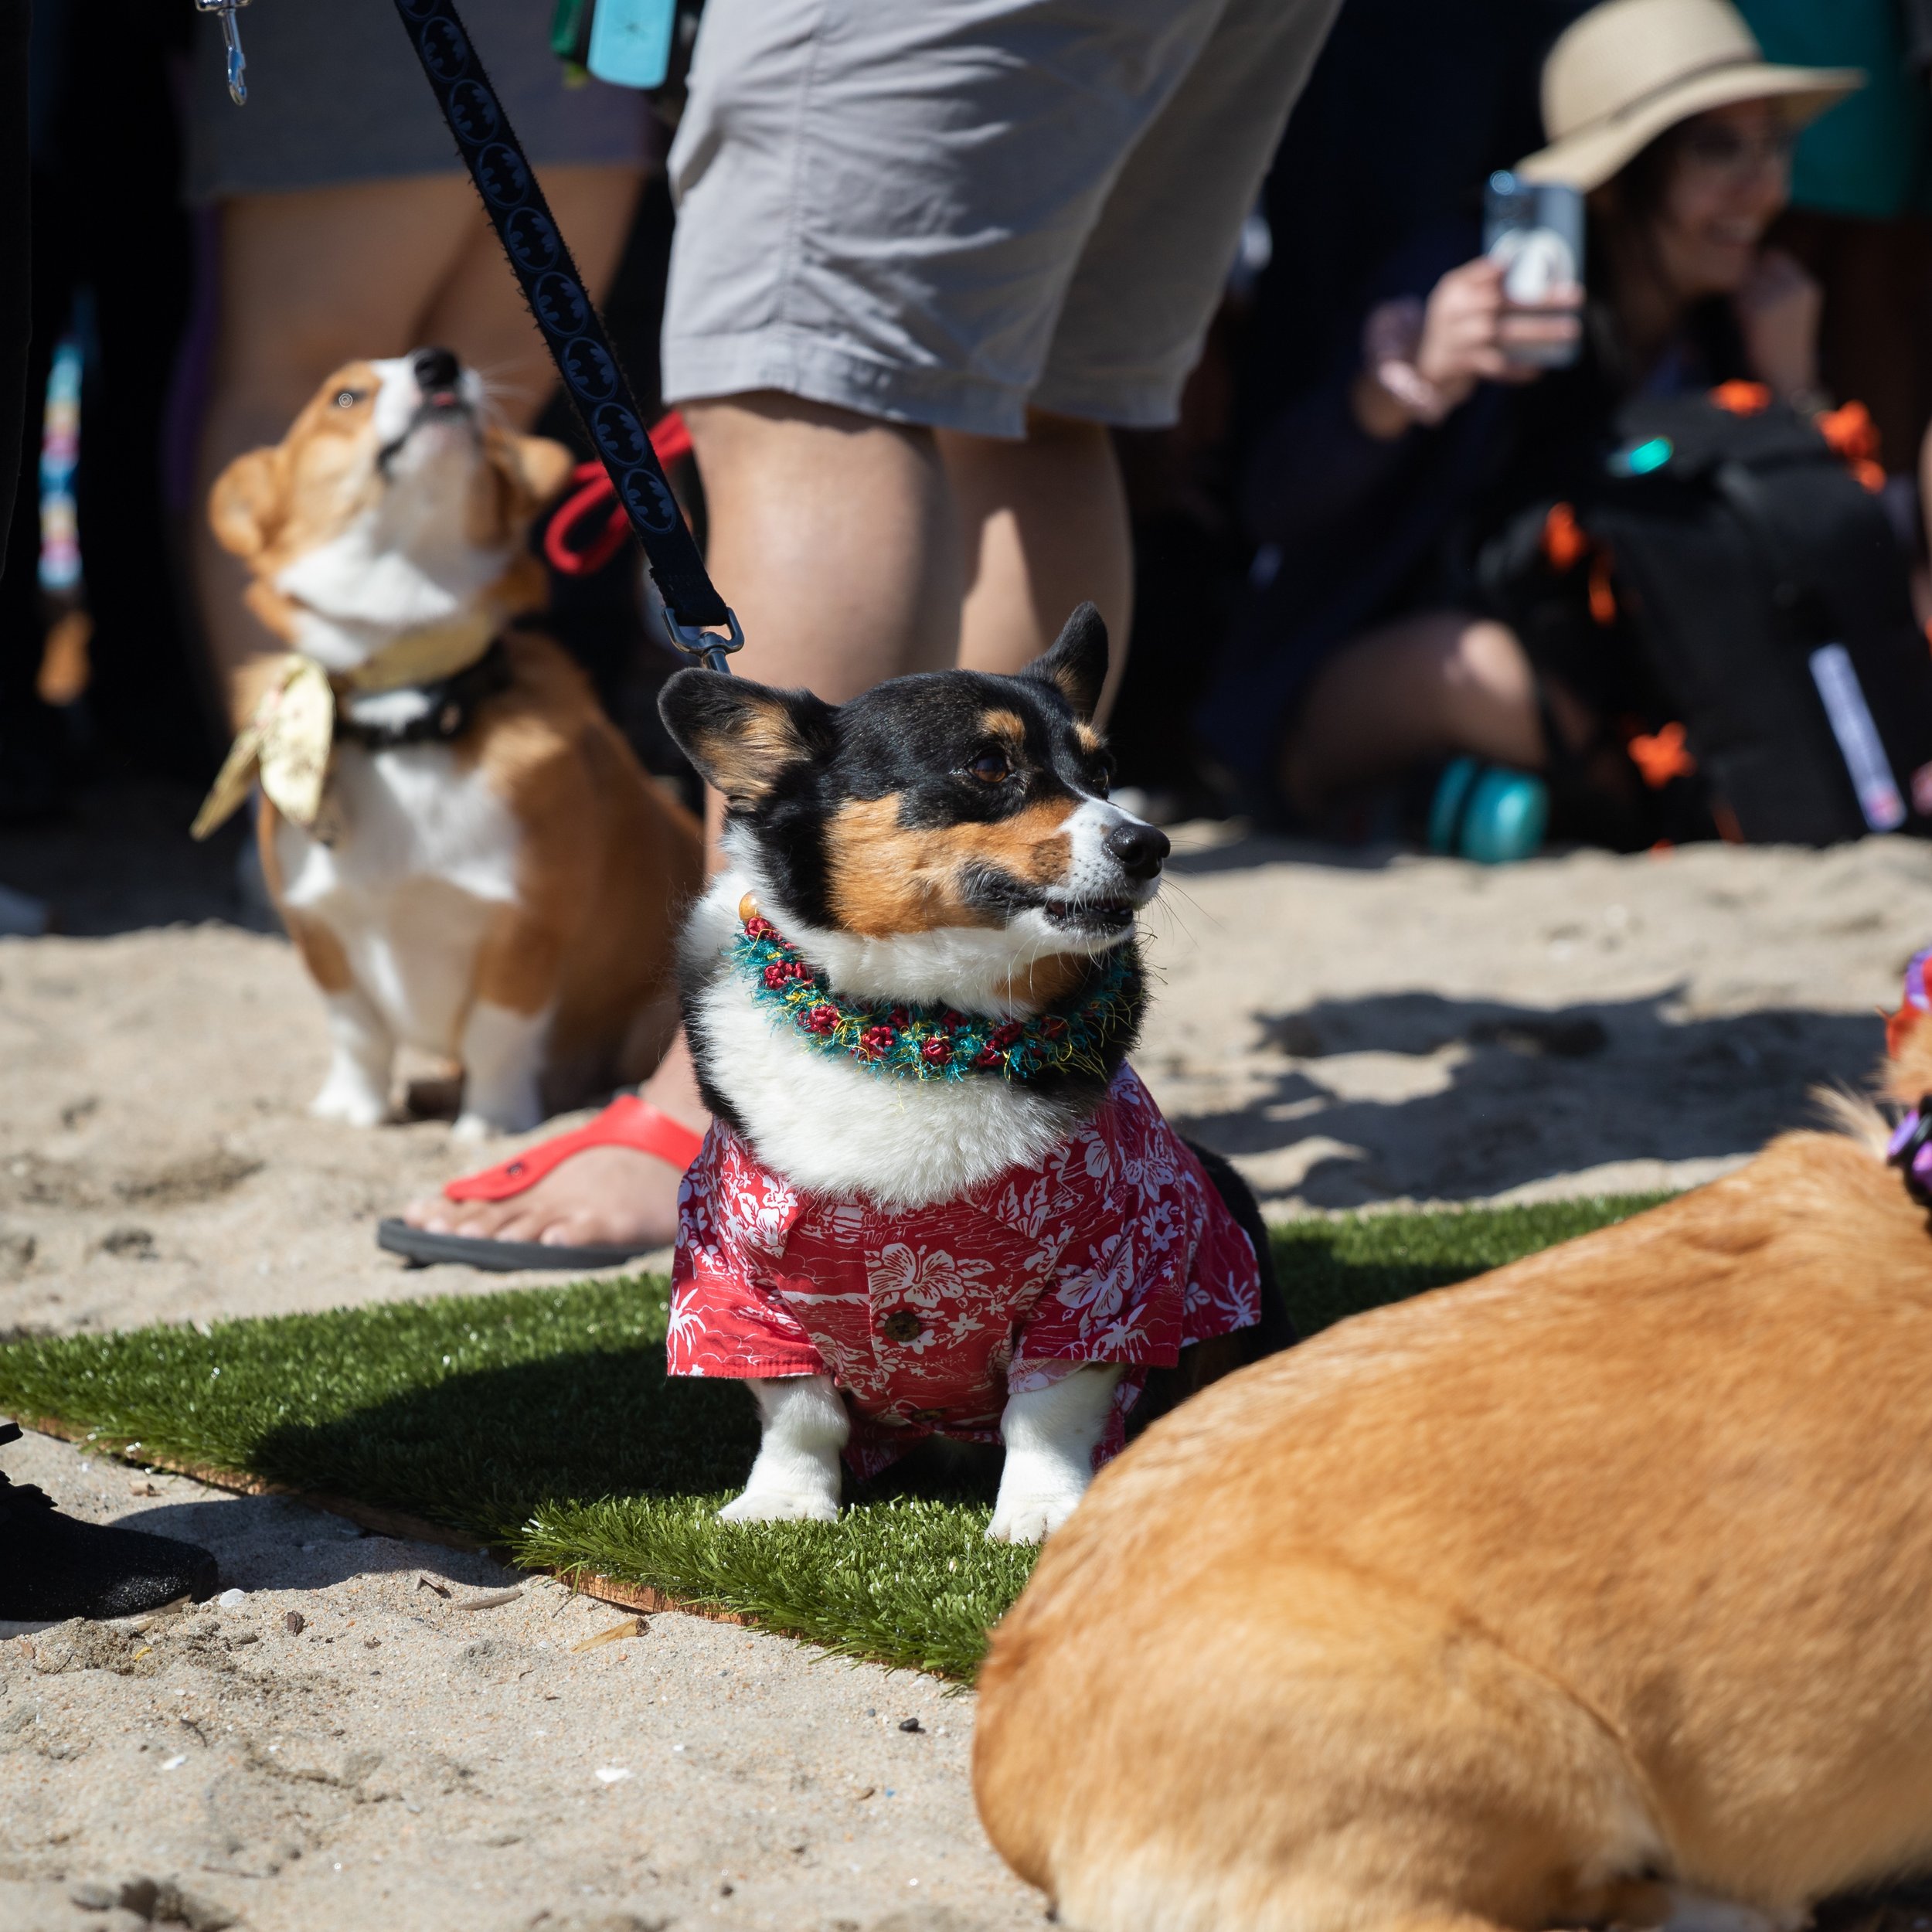  Kilo sitting during Corgi Musical Chairs, where the last to sit is eliminated, during Corgi Beach Day at Huntington Dog Beach, Huntington Beach, Calif., on Saturday, April 1, 2023. Kilo came in first place during this event. (Caylo Seals | The Corsa